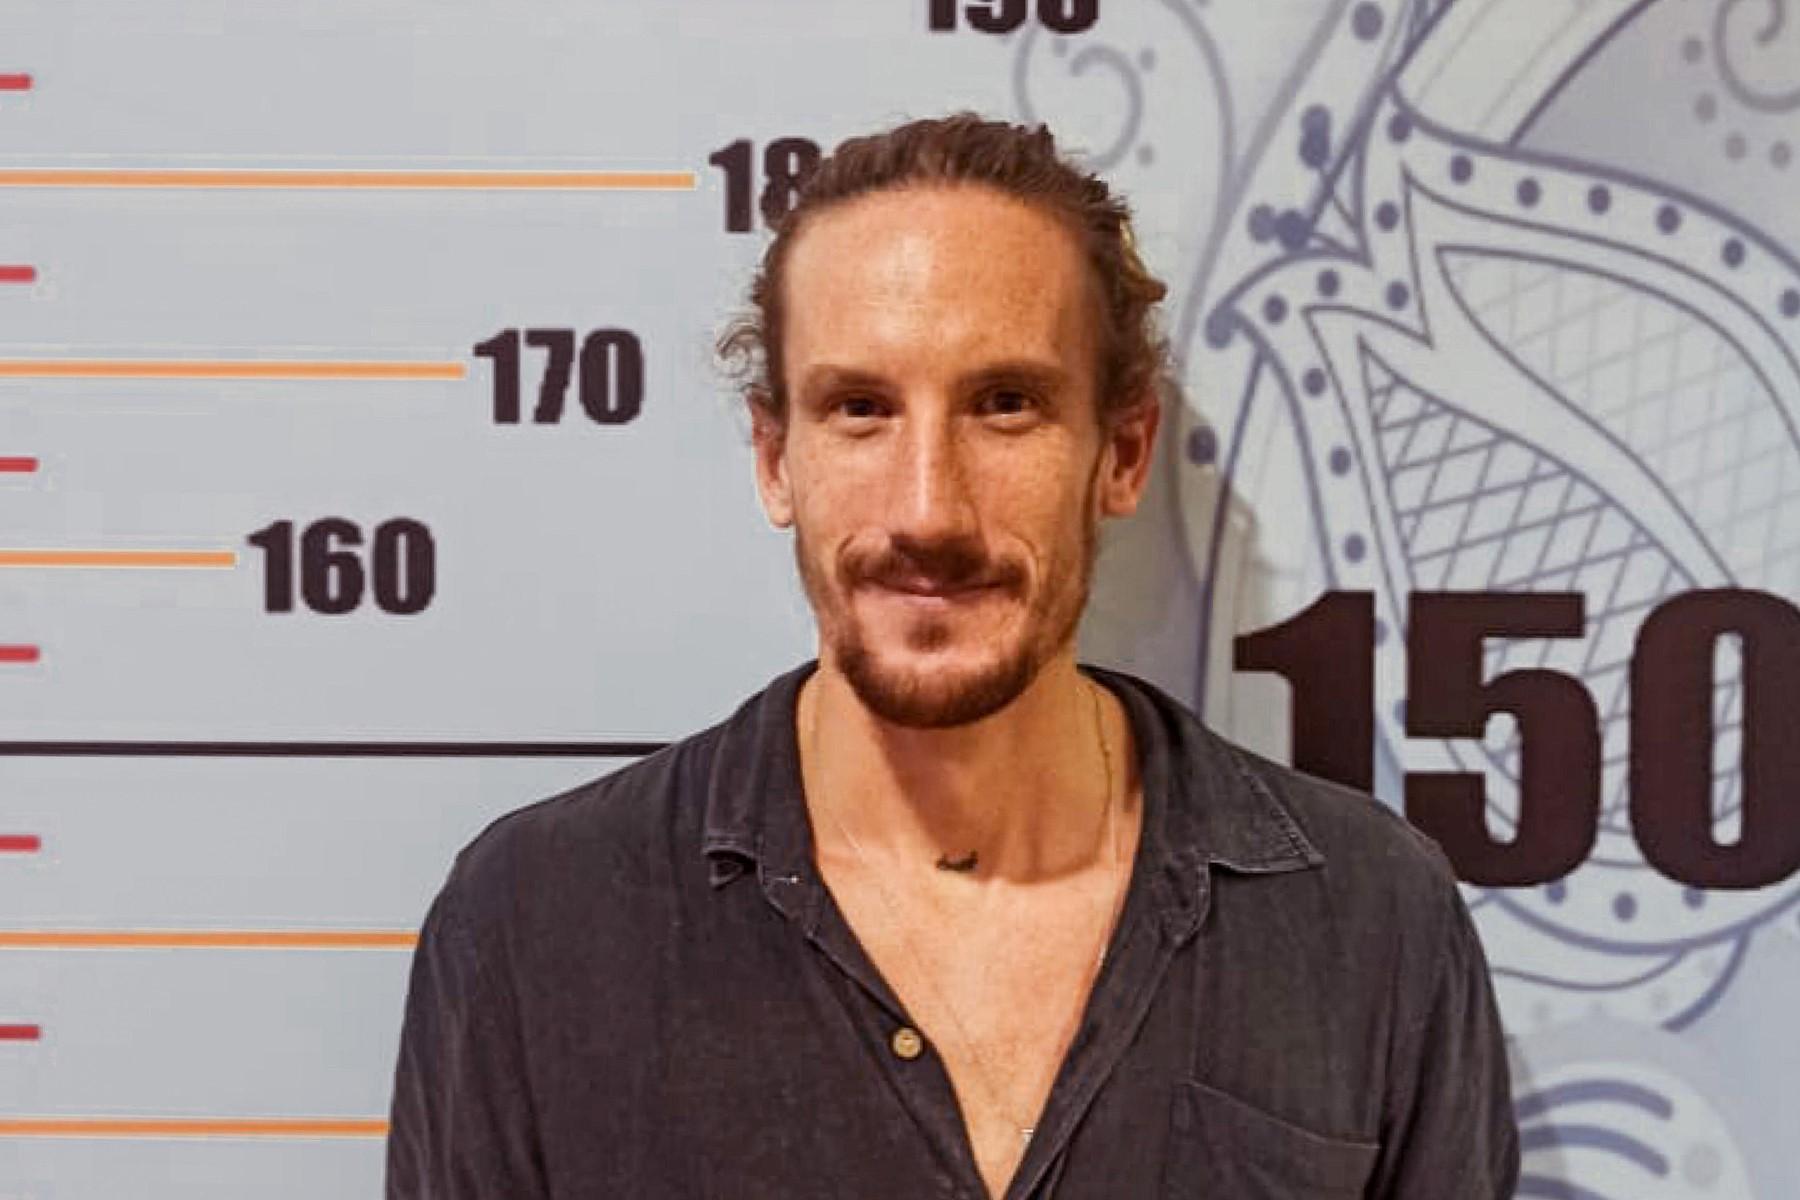 This handout photo taken on April 25 and released on April 26 by the Bali immigration office shows Canadian tourist Jeffrey Craigen detained by immigration authorities in Denpasar, on Indonesia's resort island of Bali. Photo: AFP